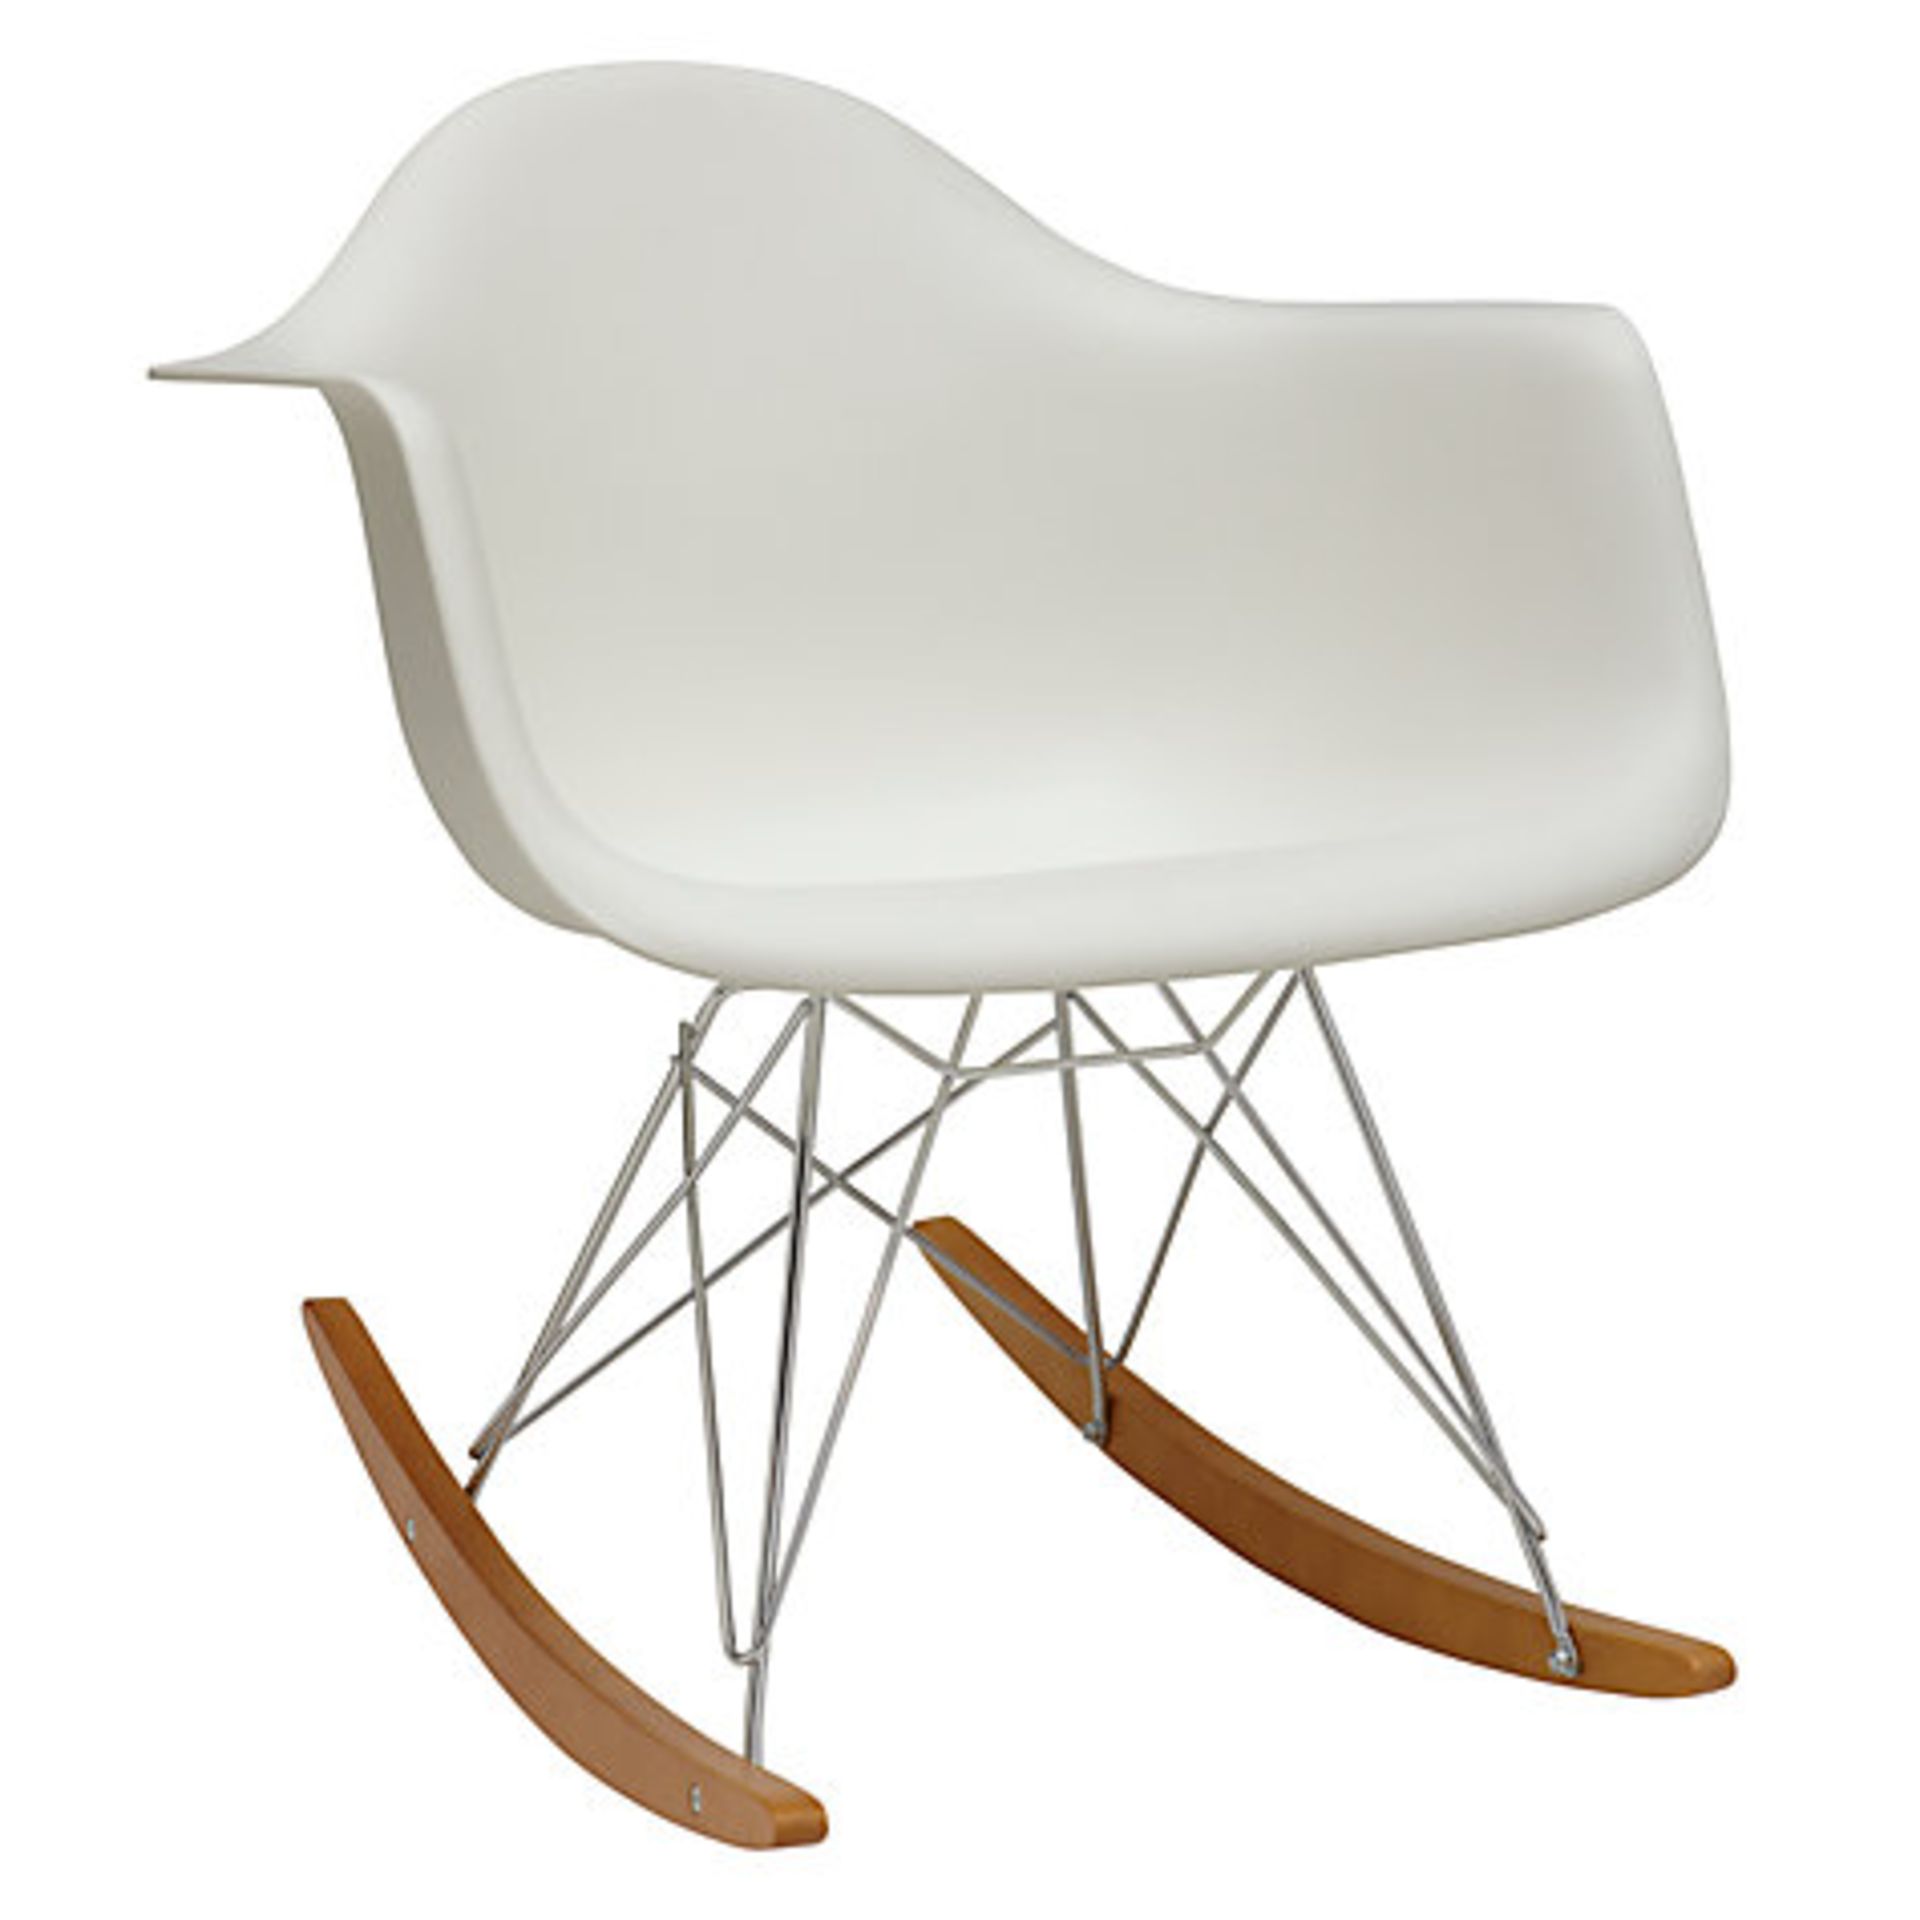 X1 BOXED BRAND NEW, EAMES STYLE ROCKER ARM CHAIR, WHITE, RRP-£149.99 (MD-CHAIR)